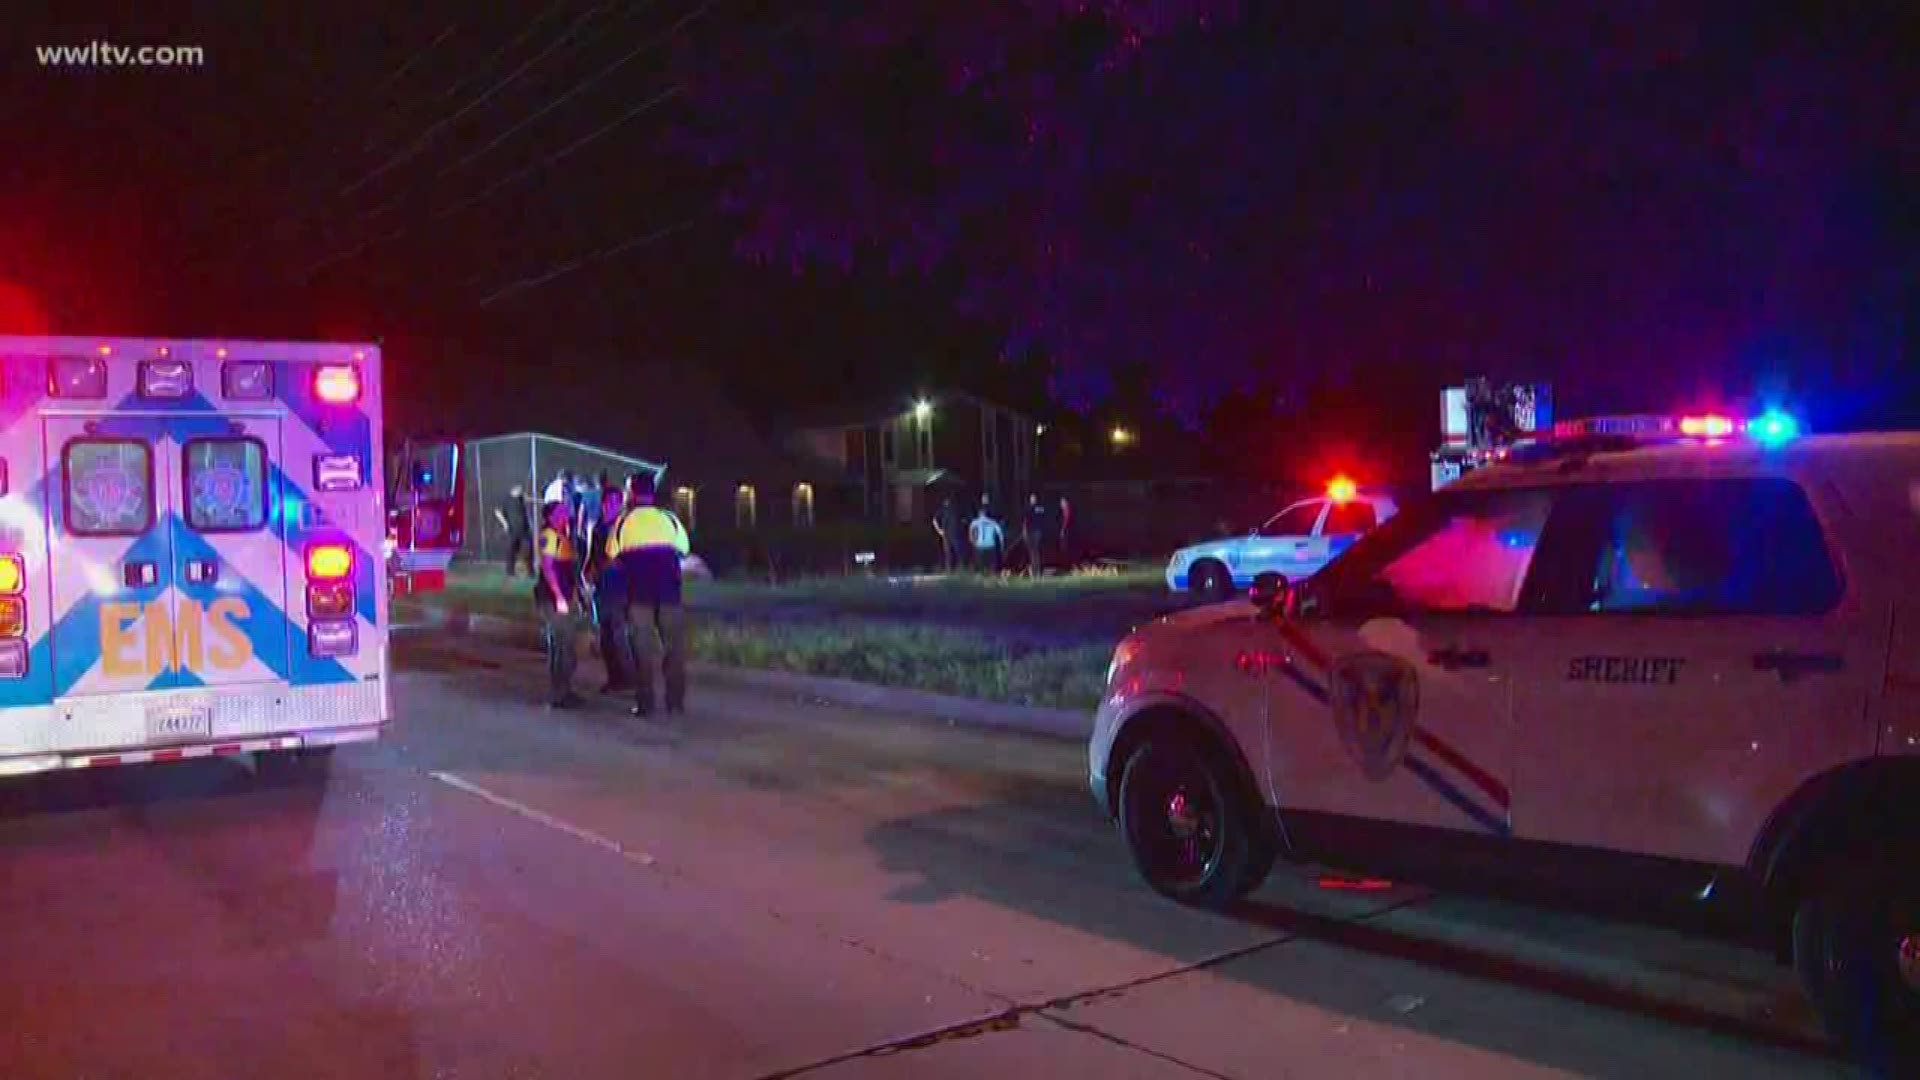 Authorities say one person is dead after a minivan crashed into a Metairie canal late Wednesday.

Jefferson Parish Sheriff Joseph Lopinto said the crash happened around 10:40 p.m. in the 4100 block of West Esplanade Avenue.